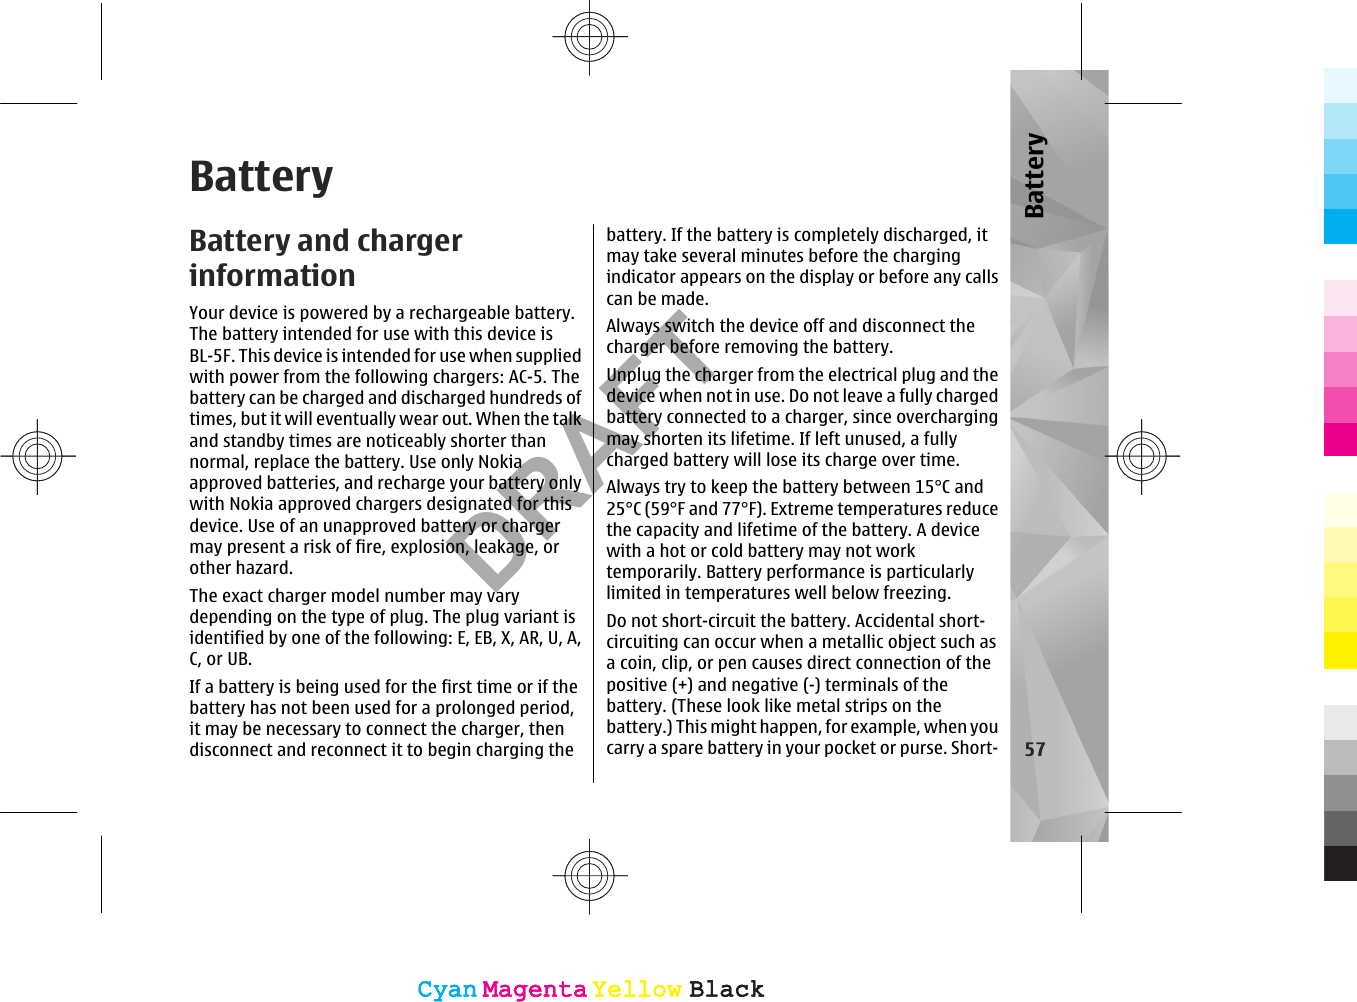 BatteryBattery and chargerinformationYour device is powered by a rechargeable battery.The battery intended for use with this device isBL-5F. This device is intended for use when suppliedwith power from the following chargers: AC-5. Thebattery can be charged and discharged hundreds oftimes, but it will eventually wear out. When the talkand standby times are noticeably shorter thannormal, replace the battery. Use only Nokiaapproved batteries, and recharge your battery onlywith Nokia approved chargers designated for thisdevice. Use of an unapproved battery or chargermay present a risk of fire, explosion, leakage, orother hazard.The exact charger model number may varydepending on the type of plug. The plug variant isidentified by one of the following: E, EB, X, AR, U, A,C, or UB.If a battery is being used for the first time or if thebattery has not been used for a prolonged period,it may be necessary to connect the charger, thendisconnect and reconnect it to begin charging thebattery. If the battery is completely discharged, itmay take several minutes before the chargingindicator appears on the display or before any callscan be made.Always switch the device off and disconnect thecharger before removing the battery.Unplug the charger from the electrical plug and thedevice when not in use. Do not leave a fully chargedbattery connected to a charger, since overchargingmay shorten its lifetime. If left unused, a fullycharged battery will lose its charge over time.Always try to keep the battery between 15°C and25°C (59°F and 77°F). Extreme temperatures reducethe capacity and lifetime of the battery. A devicewith a hot or cold battery may not worktemporarily. Battery performance is particularlylimited in temperatures well below freezing.Do not short-circuit the battery. Accidental short-circuiting can occur when a metallic object such asa coin, clip, or pen causes direct connection of thepositive (+) and negative (-) terminals of thebattery. (These look like metal strips on thebattery.) This might happen, for example, when youcarry a spare battery in your pocket or purse. Short- 57BatteryCyanCyanMagentaMagentaYellowYellowBlackBlackCyanCyanMagentaMagentaYellowYellowBlackBlackDRAFT